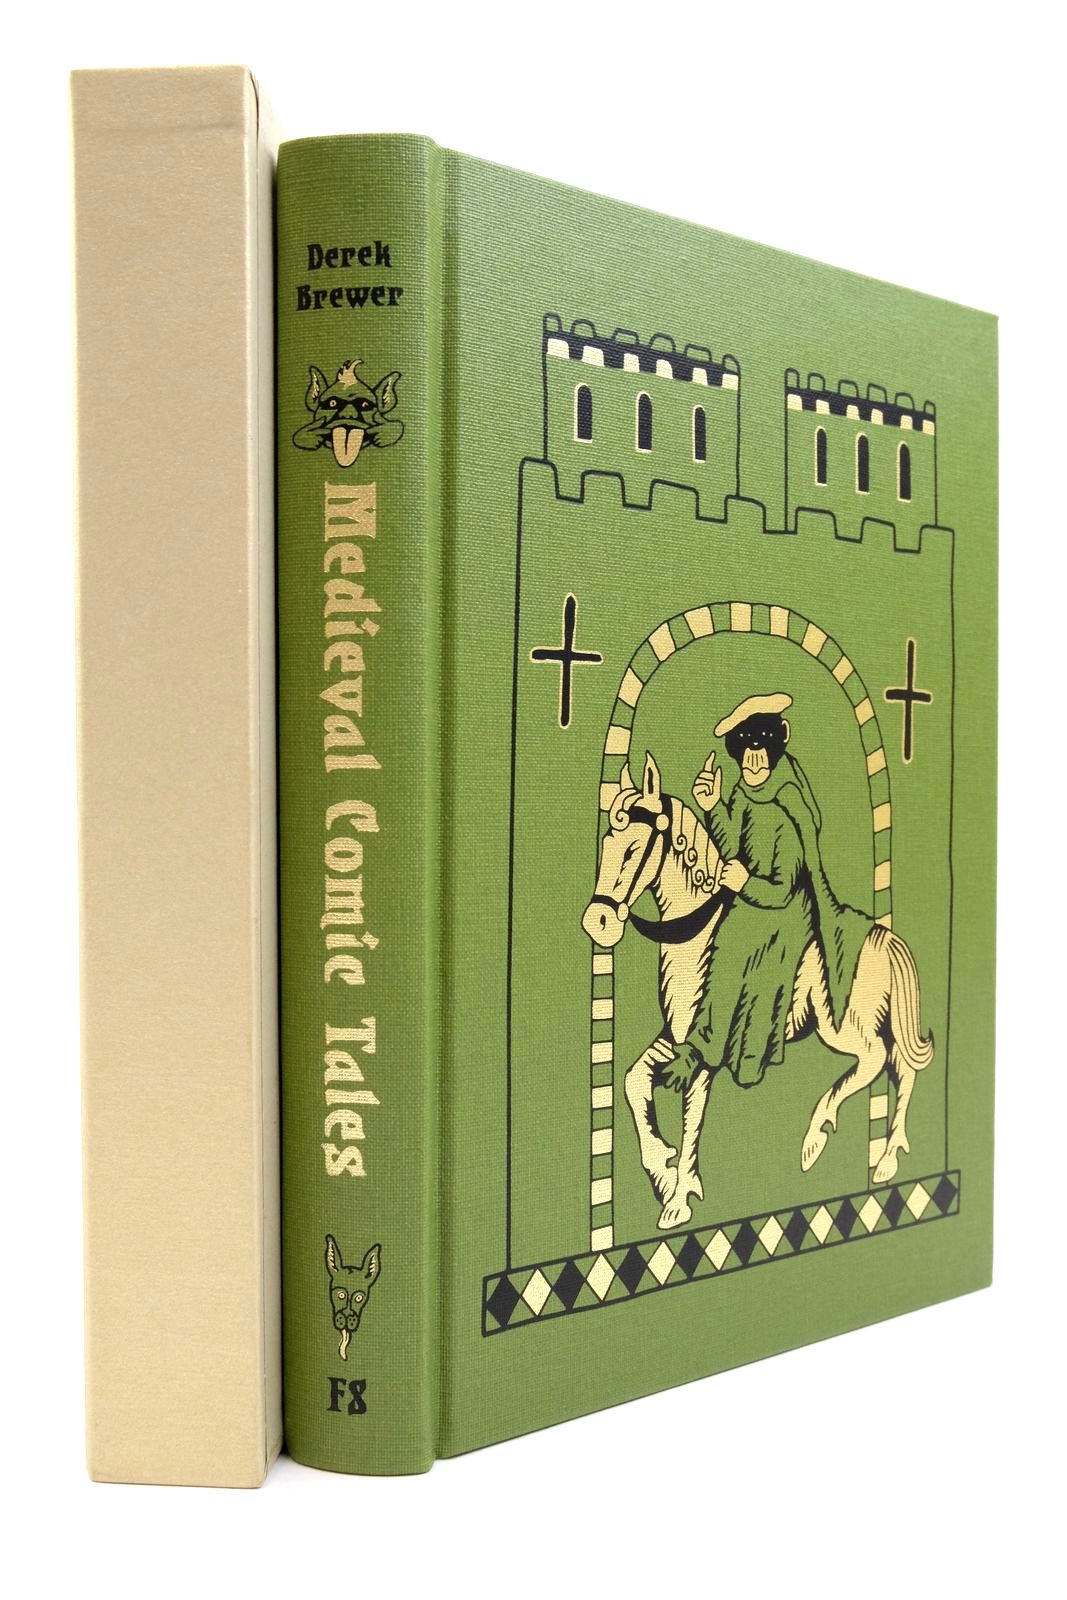 Photo of MEDIEVAL COMIC TALES written by Brewer, Derek Ackroyd, Peter illustrated by Thorne, Becca published by Folio Society (STOCK CODE: 2138885)  for sale by Stella & Rose's Books